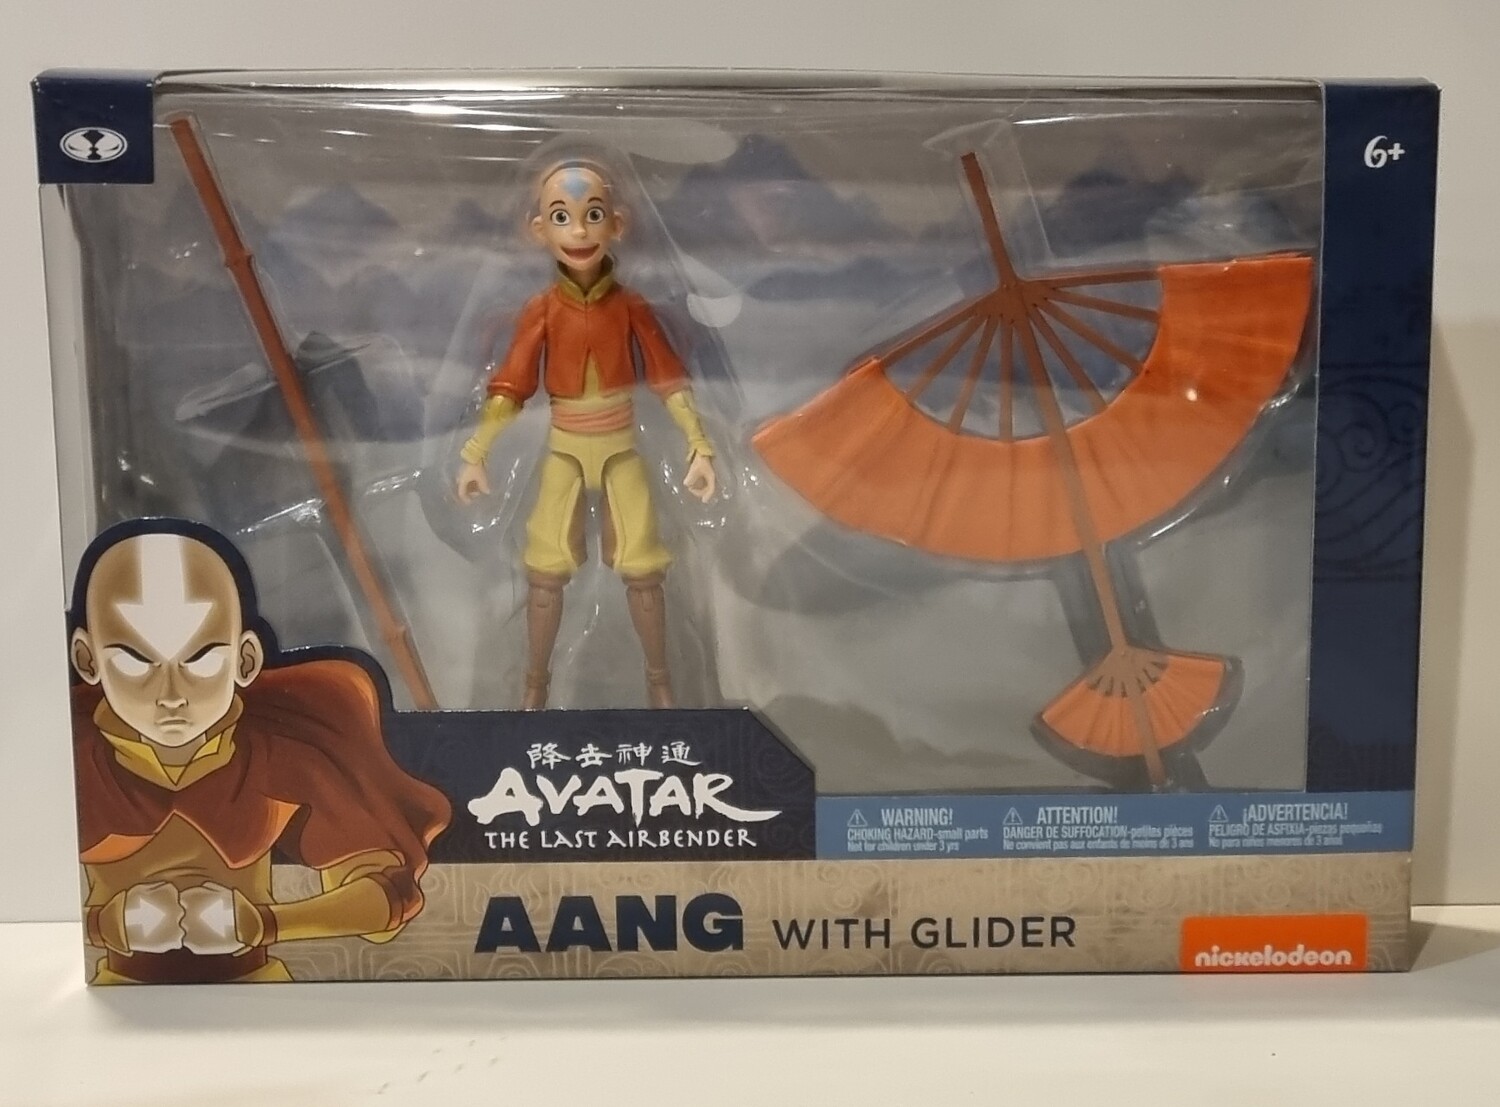 Actiefiguur, Aang with glider, 13 cm, Avatar the last Airbender